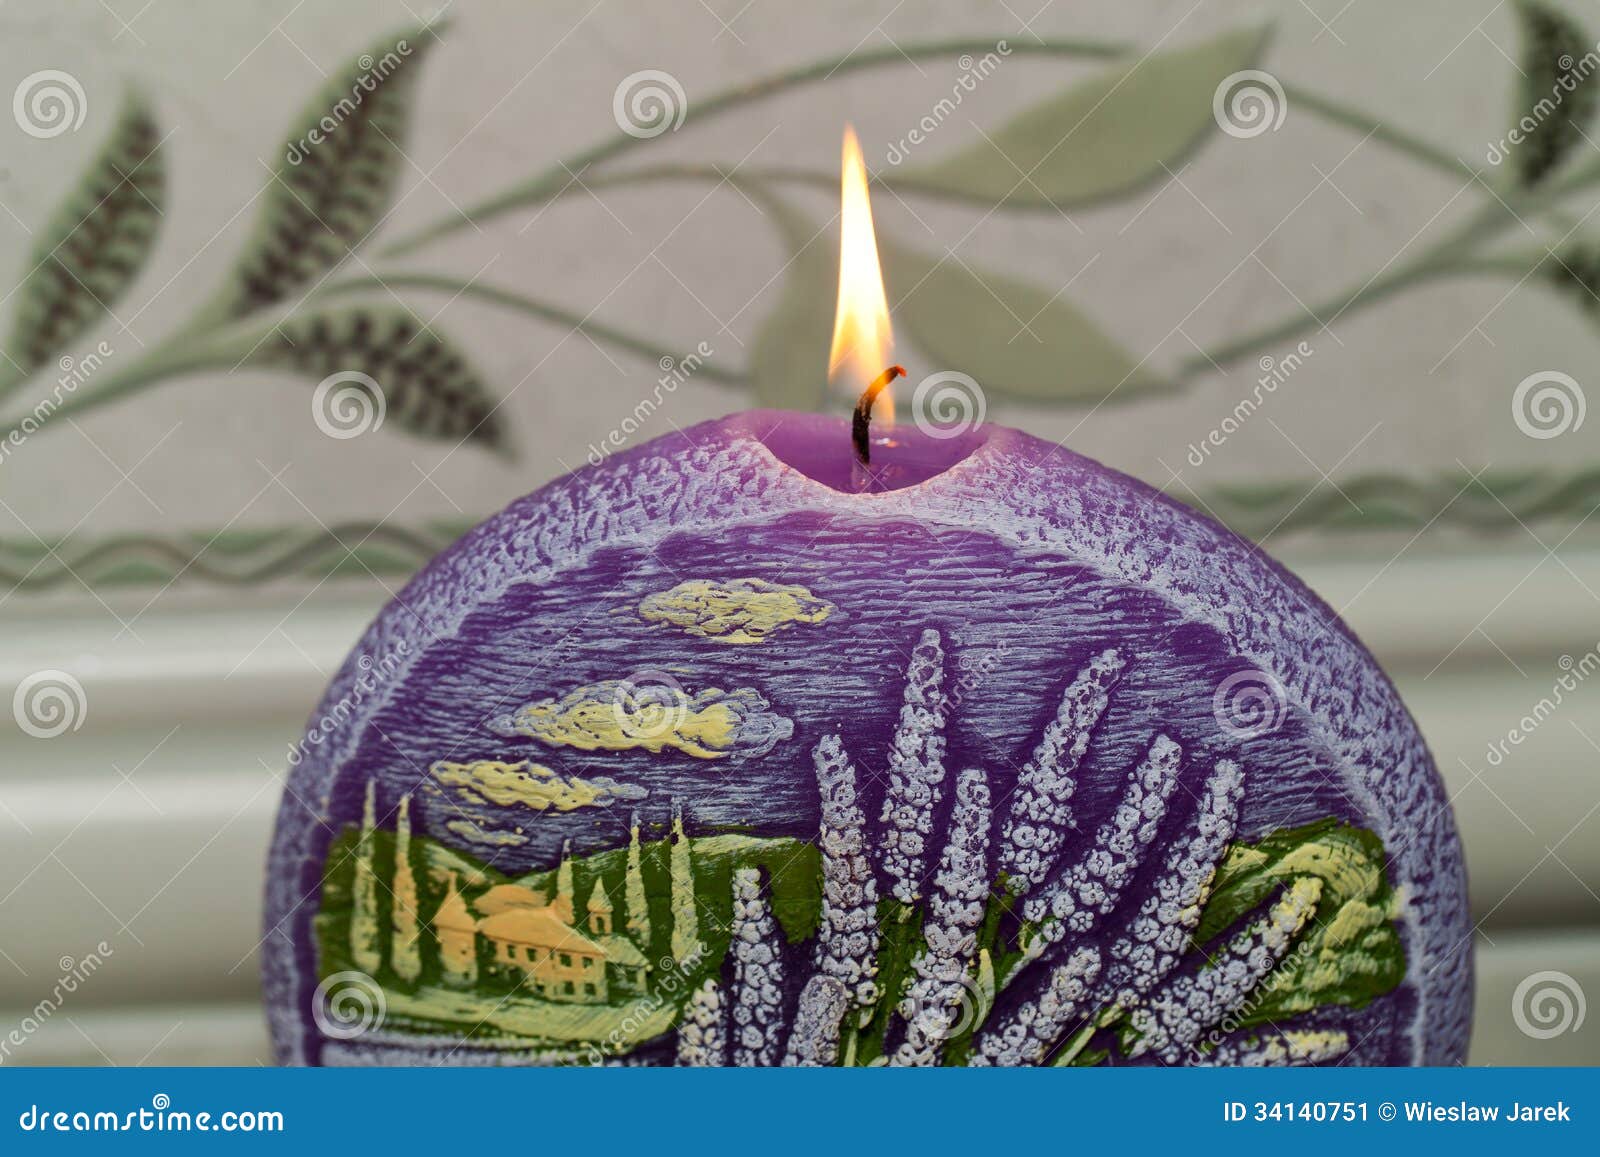 Candle With Lavender Flowers. Stock Image - Image: 34140751